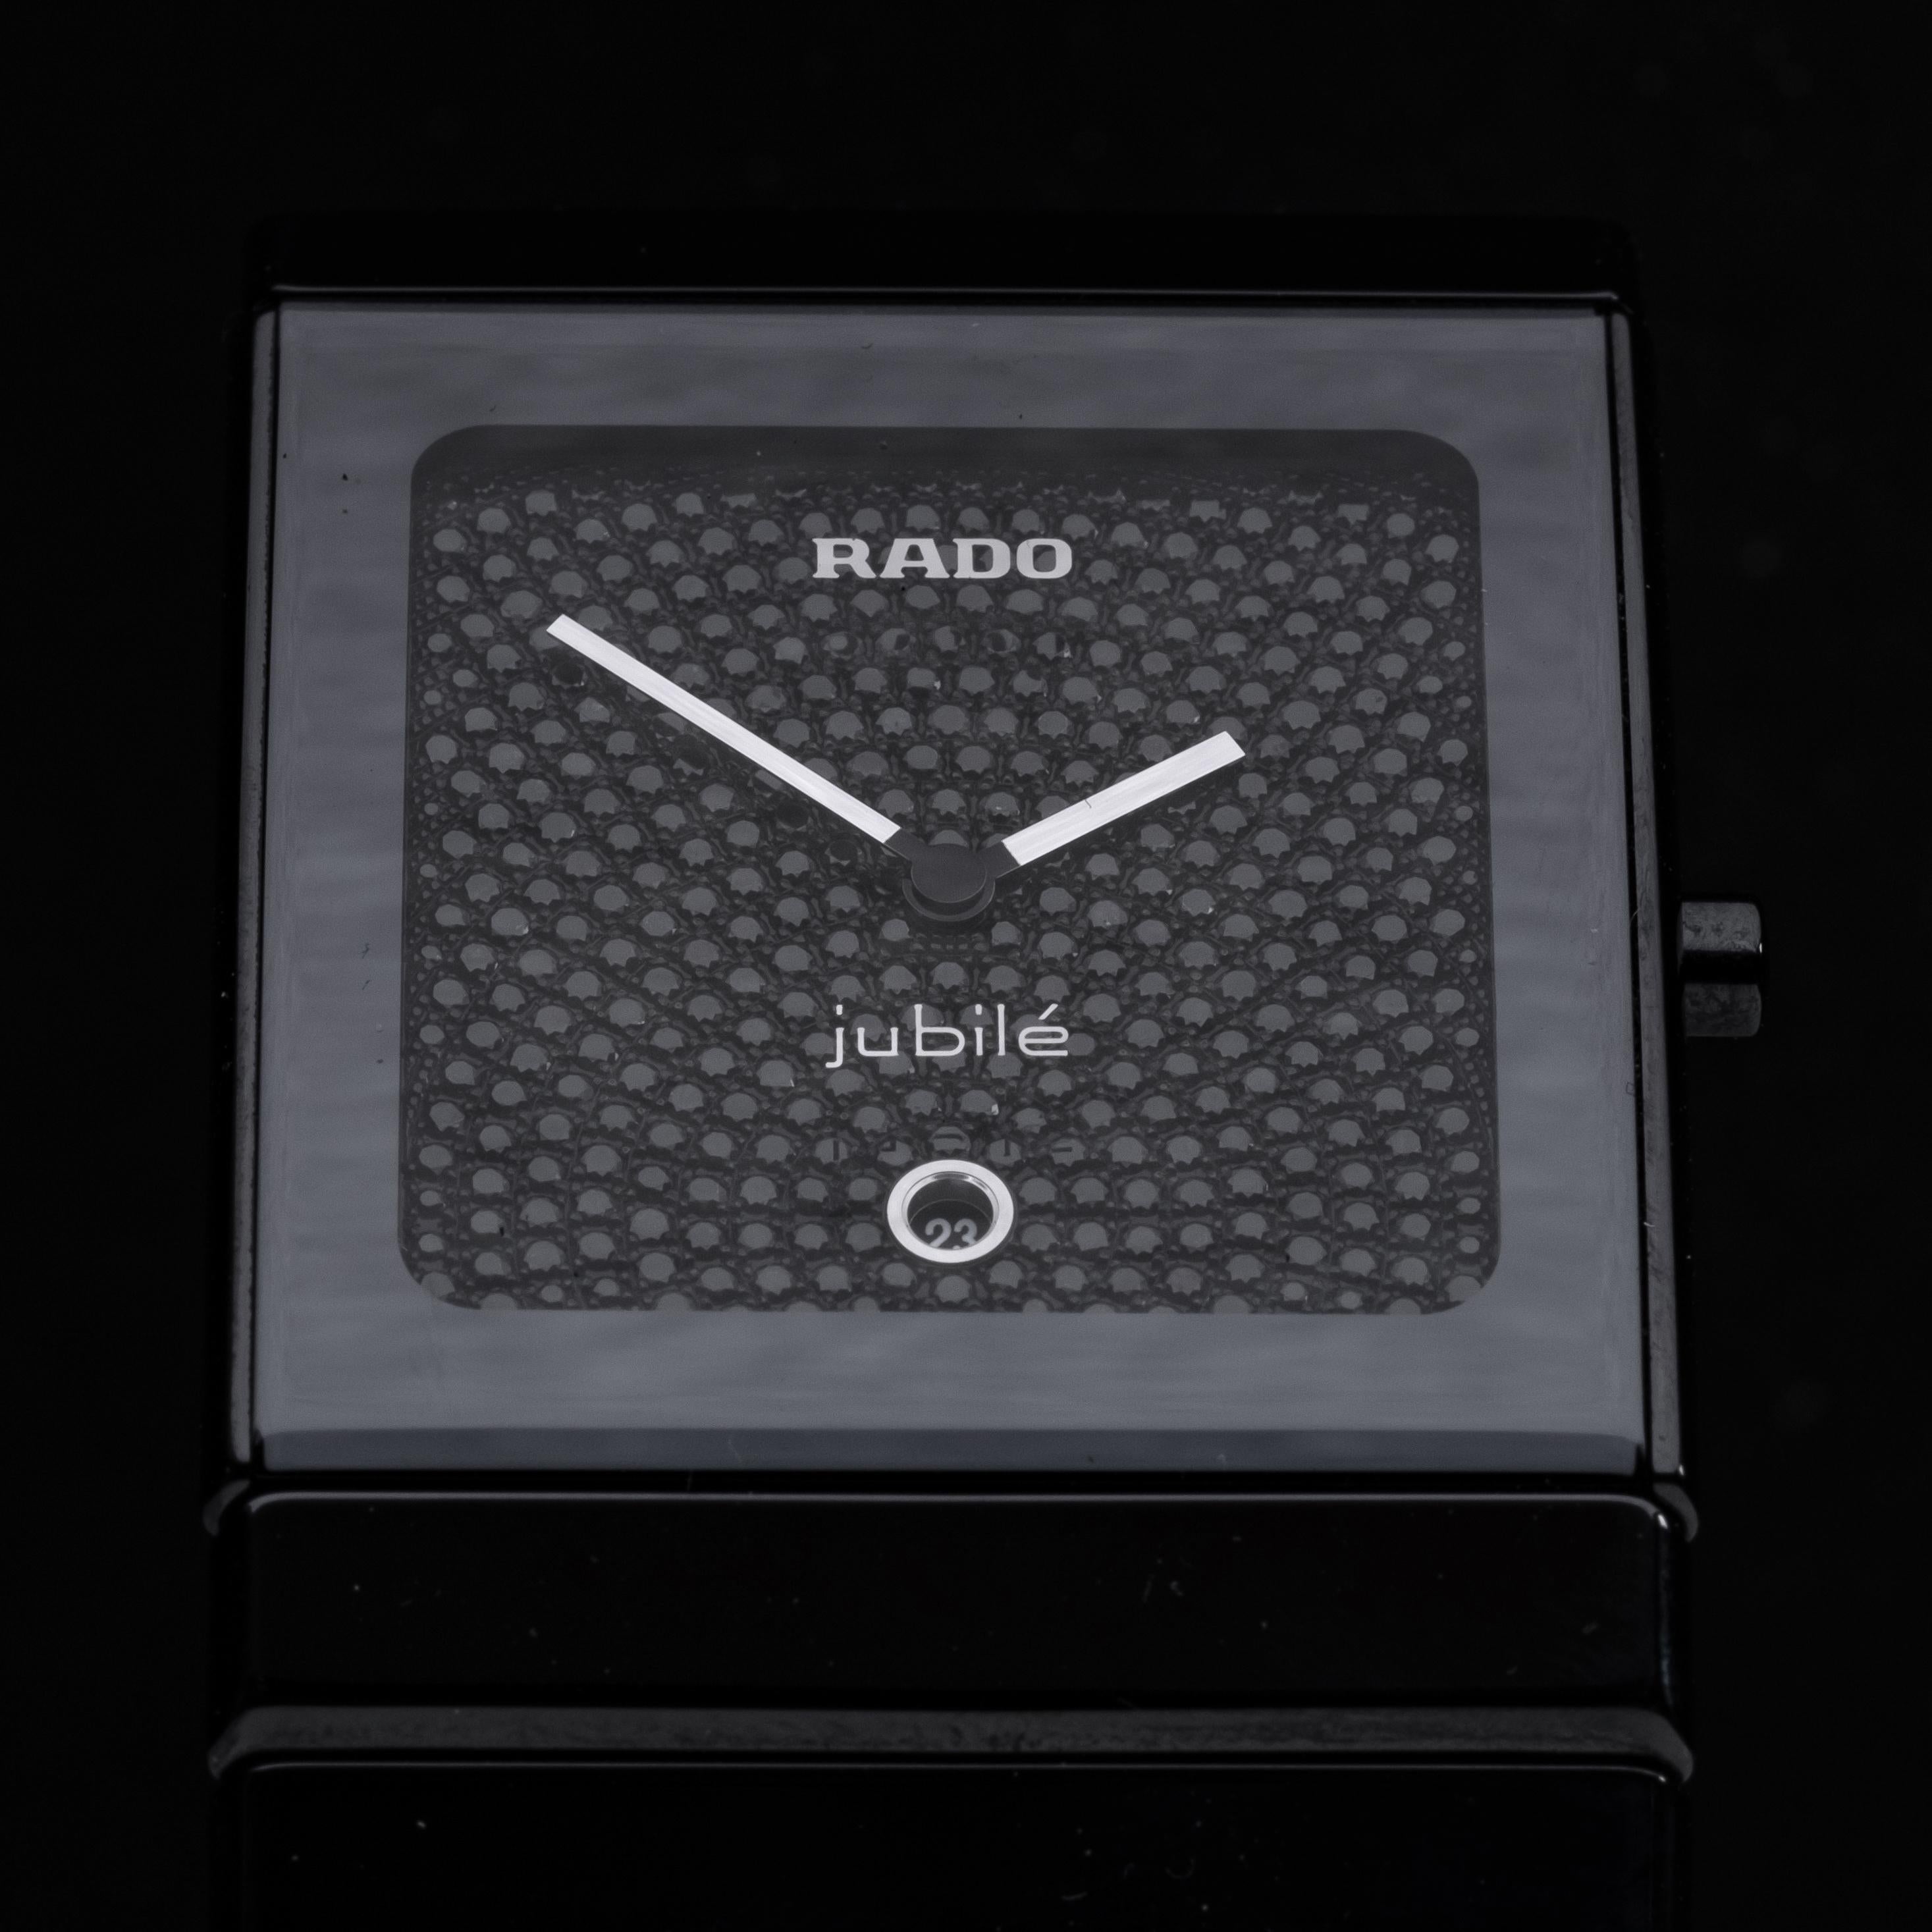 Rado Ceramica Jubile mens wrist watch with black diamond face. Retail $25770, comes with box and booklet. Band will fit approx. 8